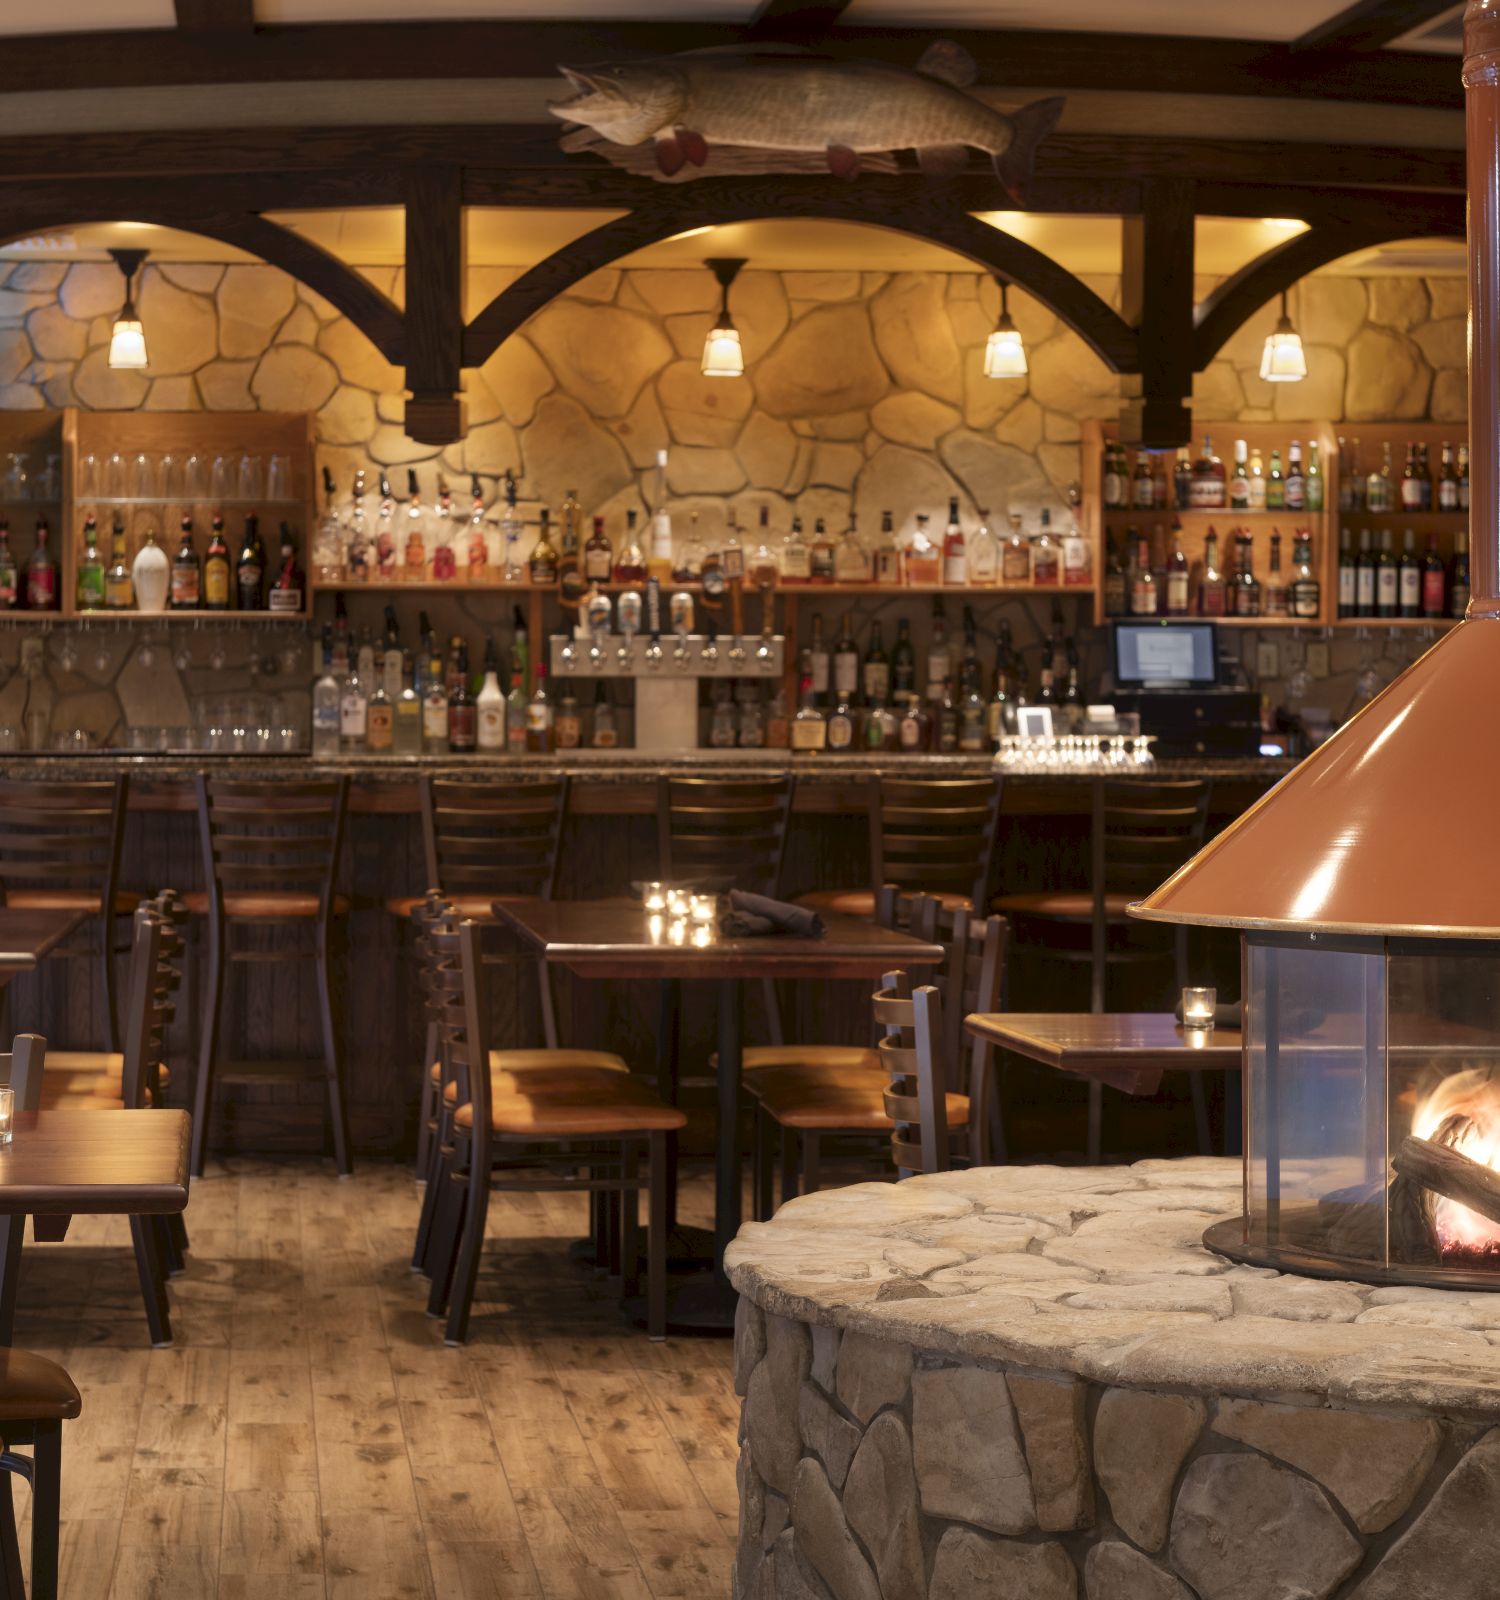 A cozy restaurant interior with wooden tables, chairs, a stone fireplace, and a fully stocked bar in the background, creating a warm, inviting atmosphere.